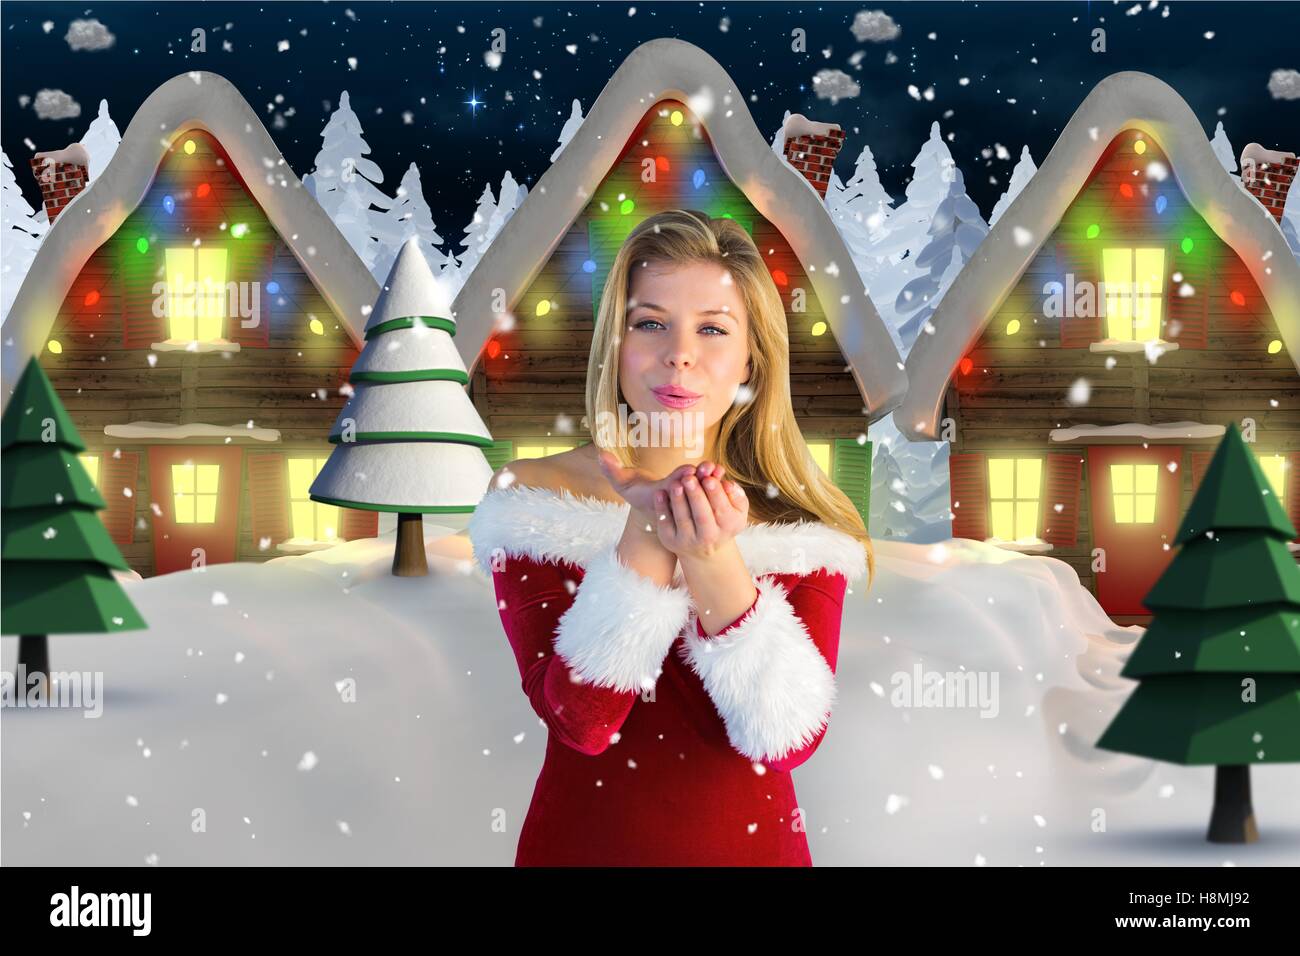 Beautiful woman in santa costume blowing a kiss against digitally generated background Stock Photo